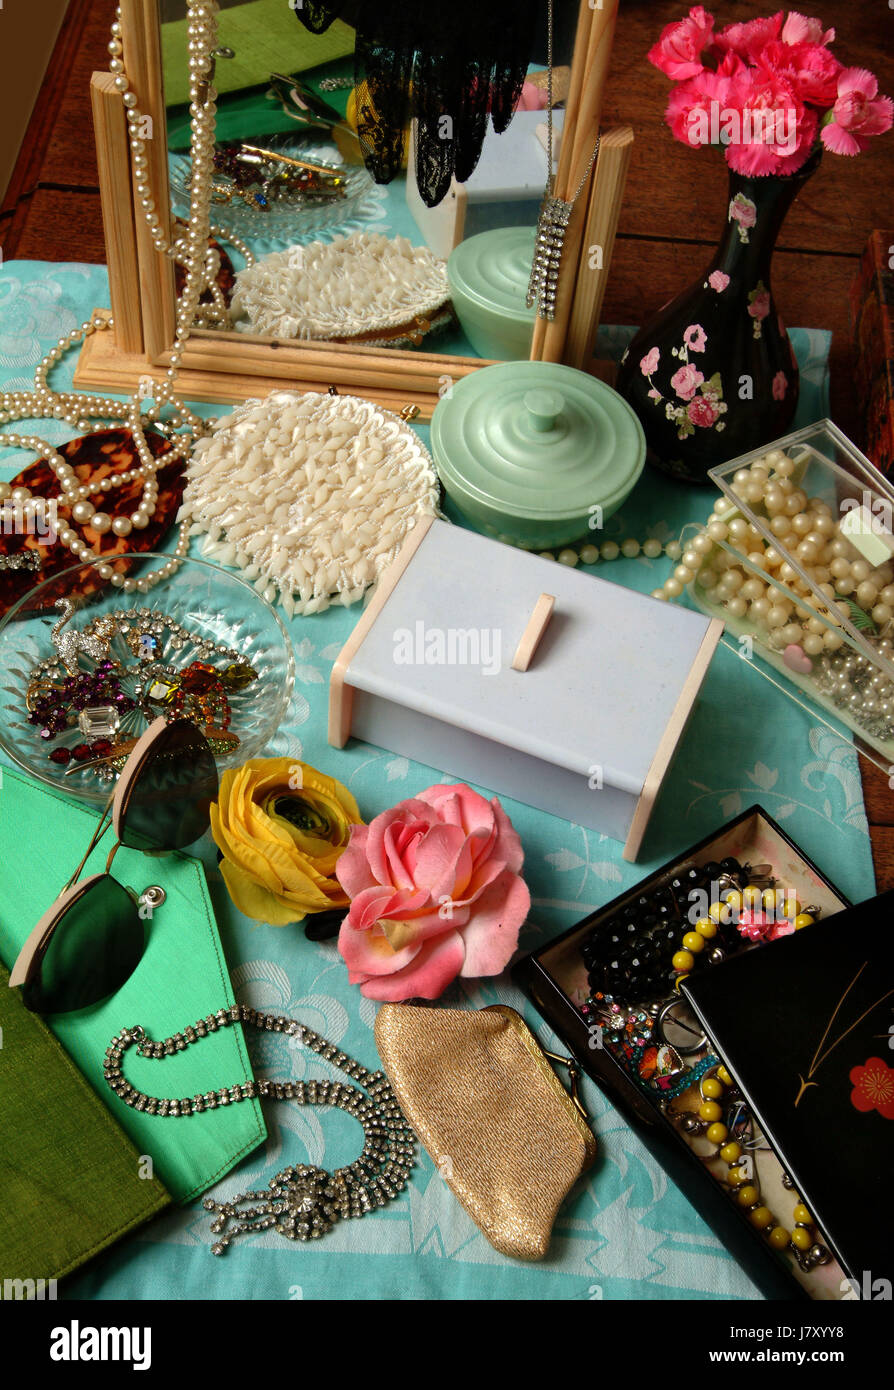 A selection of British items from the 1940's to the 1960's including kitchenware, jewelery, cushions, fashion etc. Stock Photo